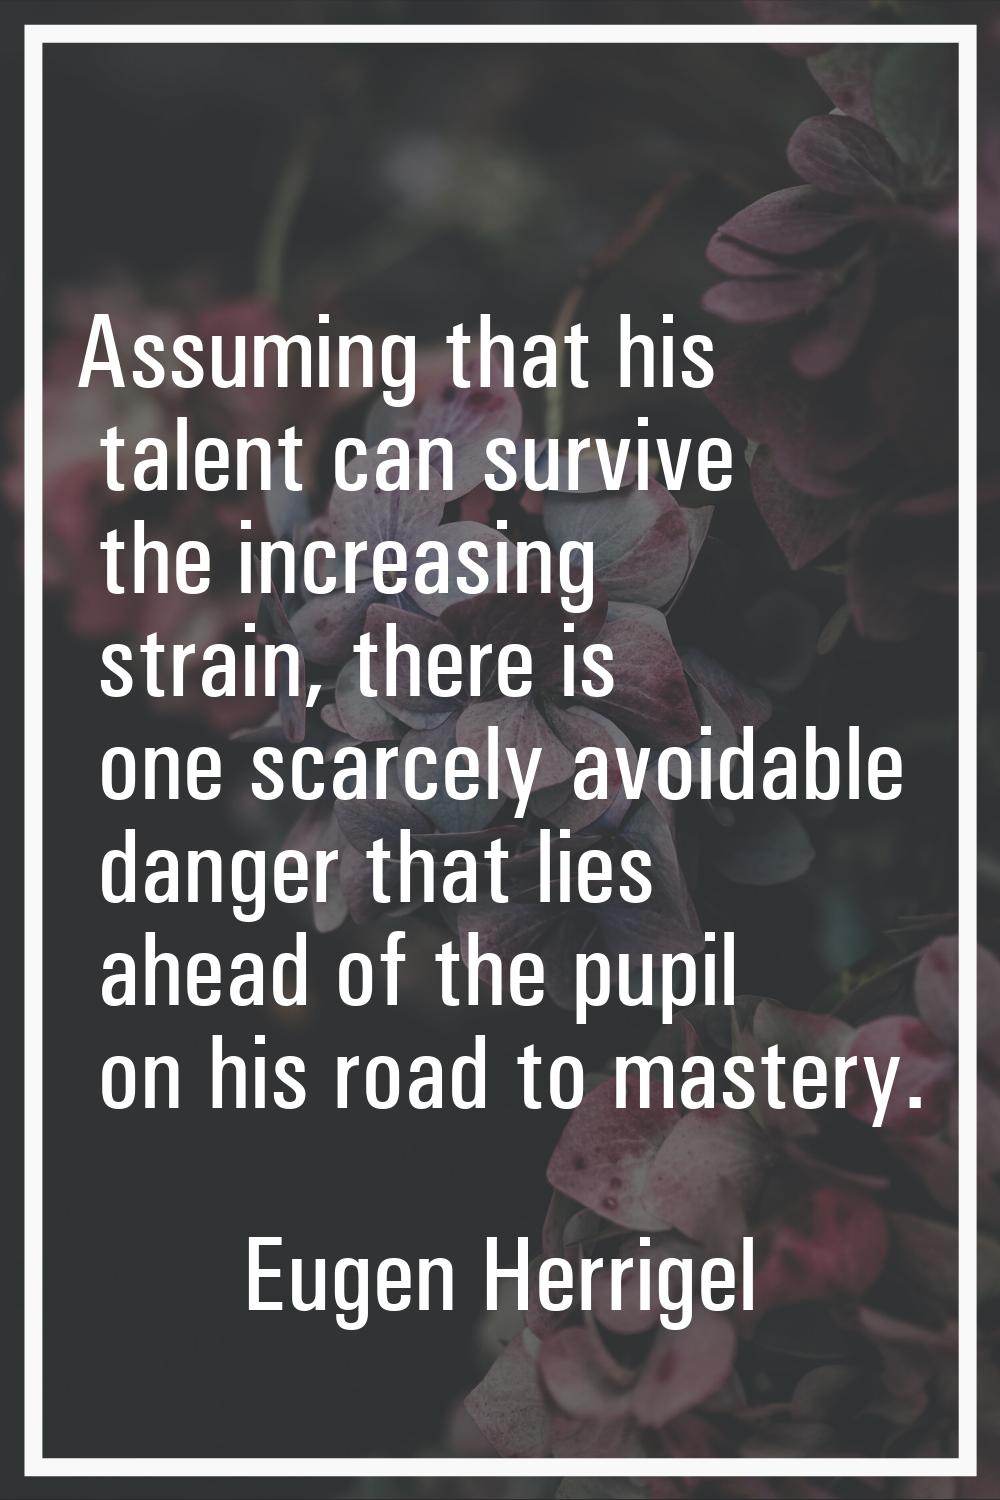 Assuming that his talent can survive the increasing strain, there is one scarcely avoidable danger 